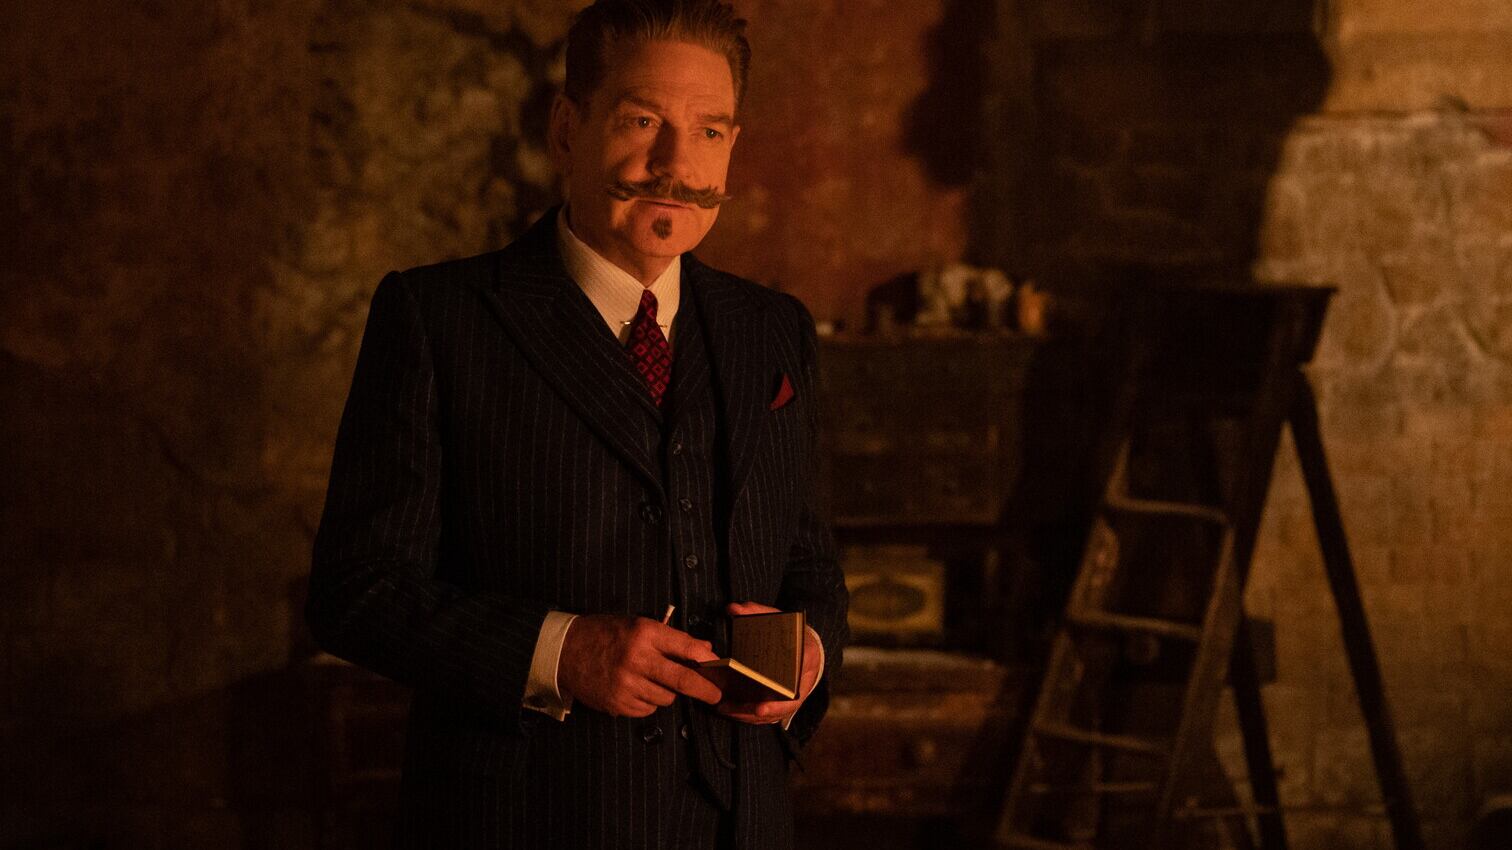 Kenneth Branagh as Hercule Poirot in 20th Century Studios’ A HAUNTING IN VENICE. Photo by Rob Youngson. © 2023 20th Century Studios. All Rights Reserved.